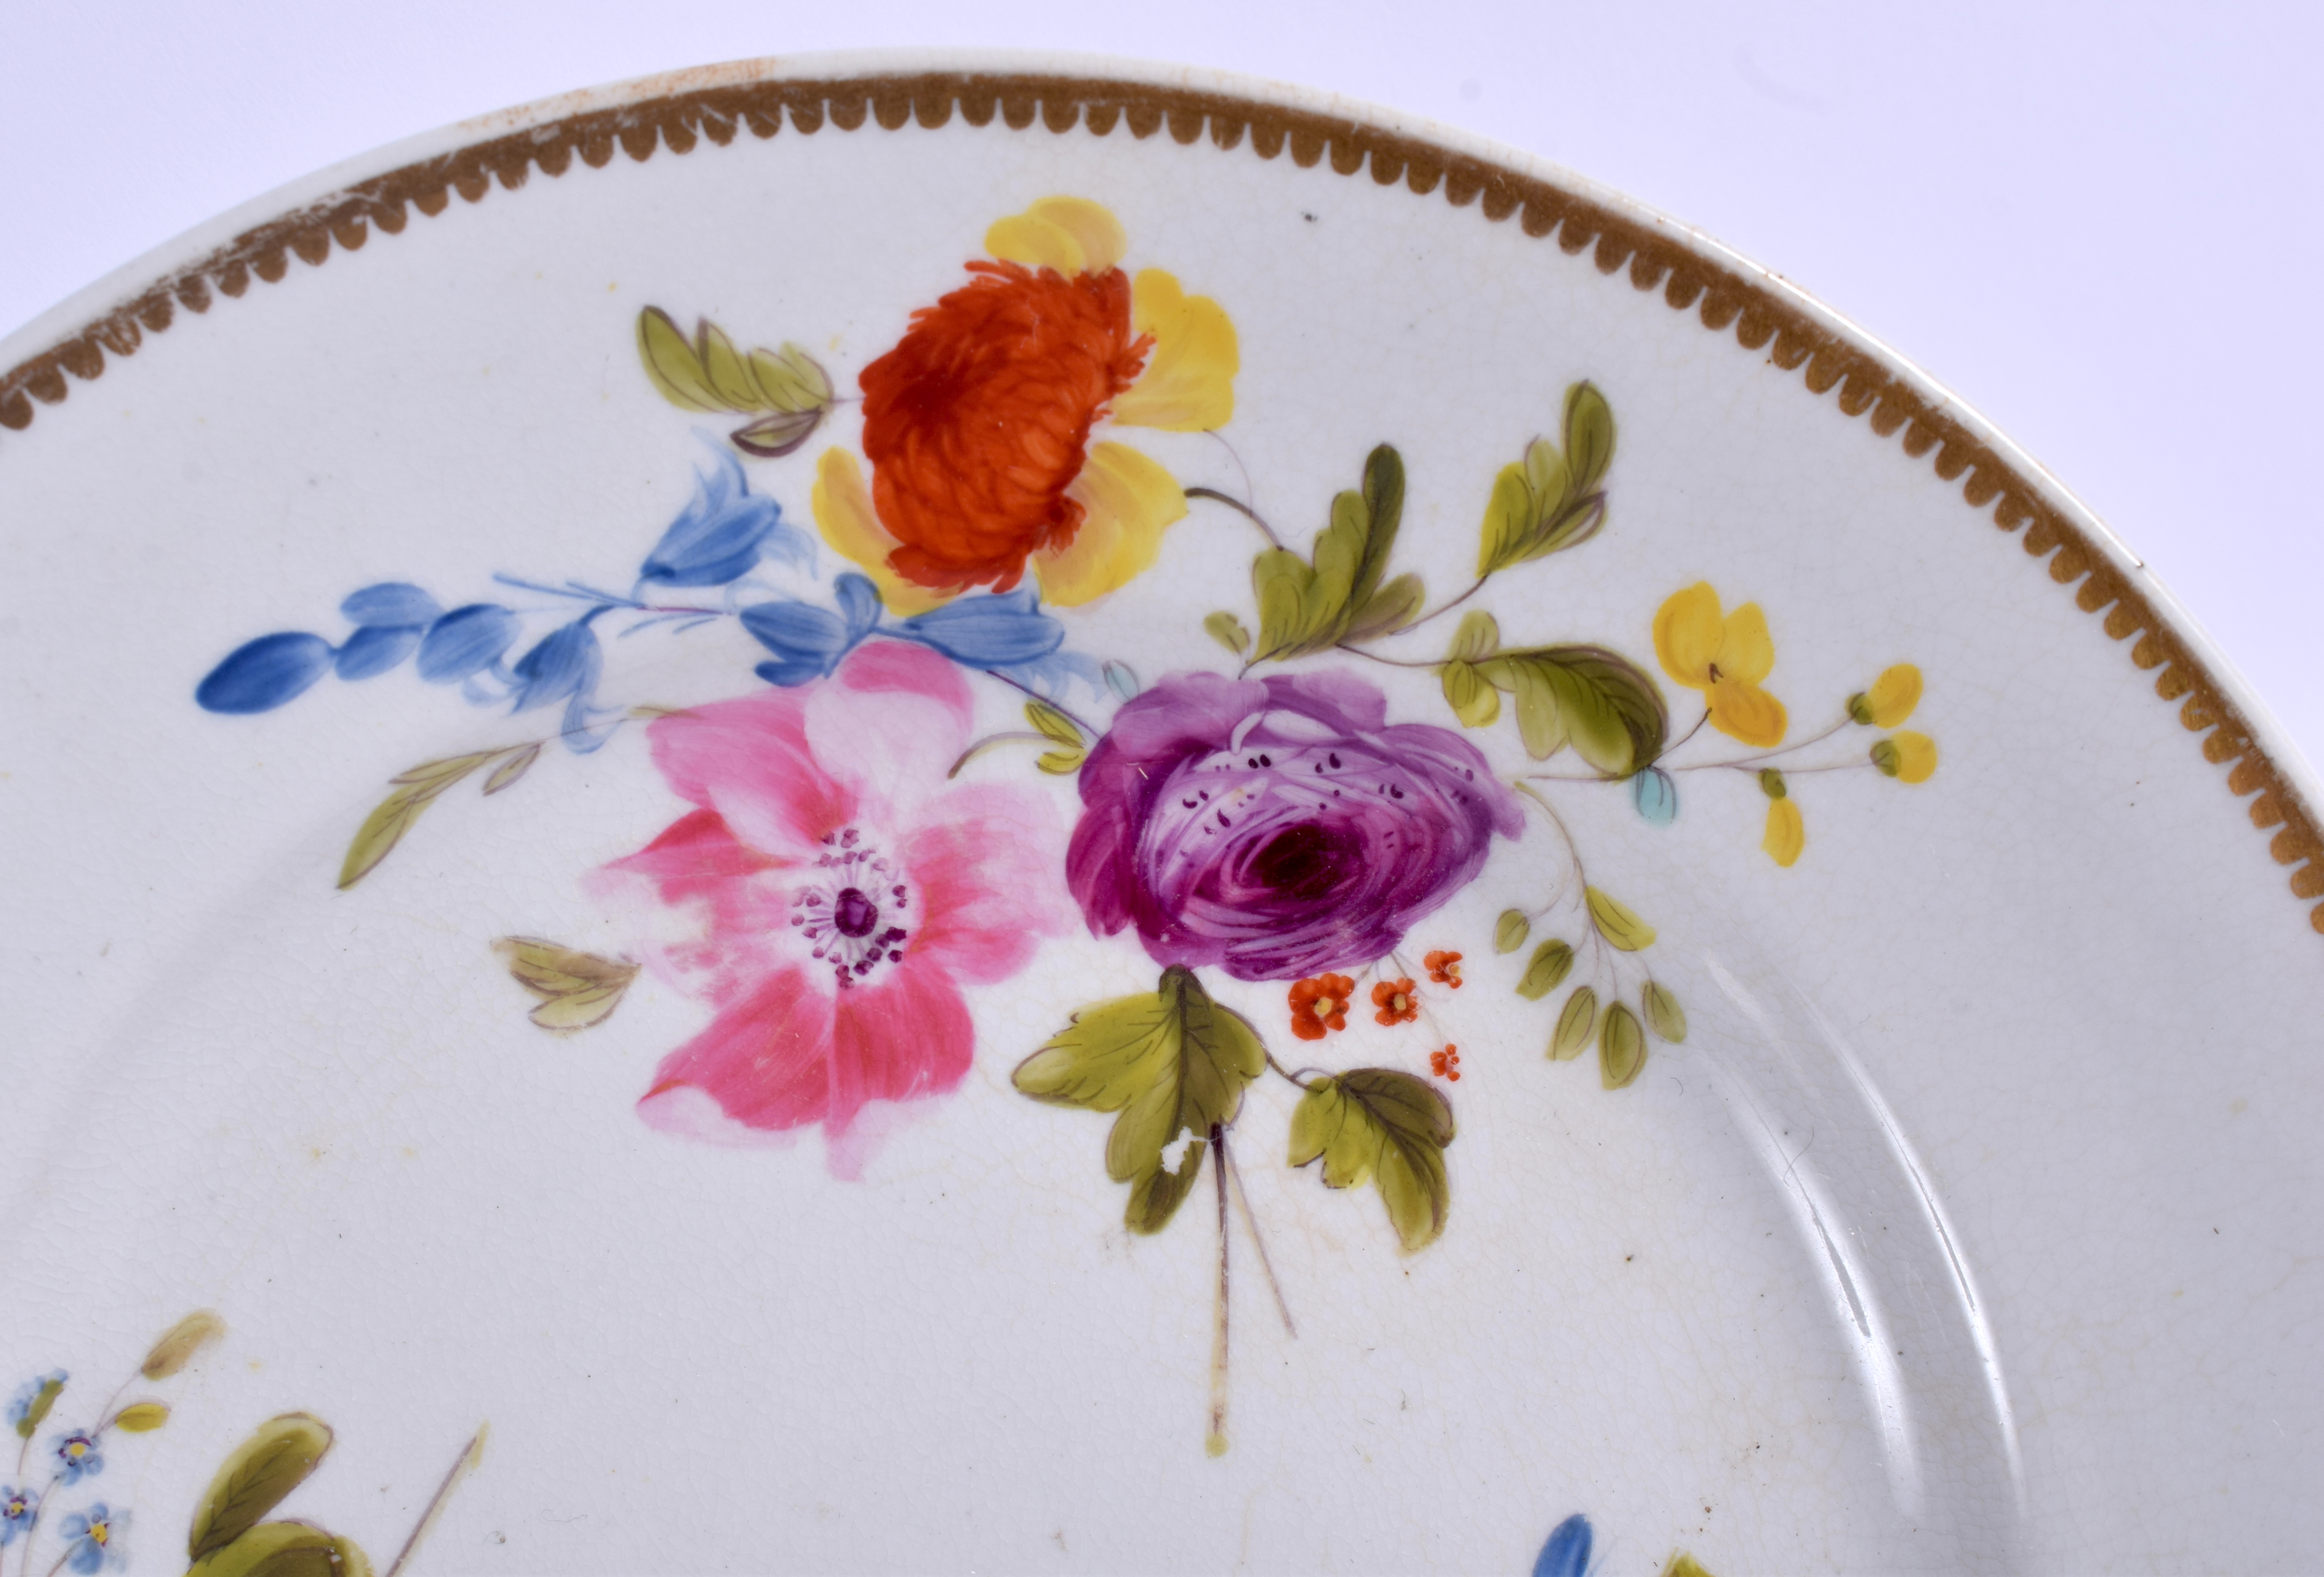 A PAIR OF EARLY 19TH CENTURY DERBY PORCELAIN PLATES painted with botanical sprays. 20 cm diameter. - Image 2 of 8